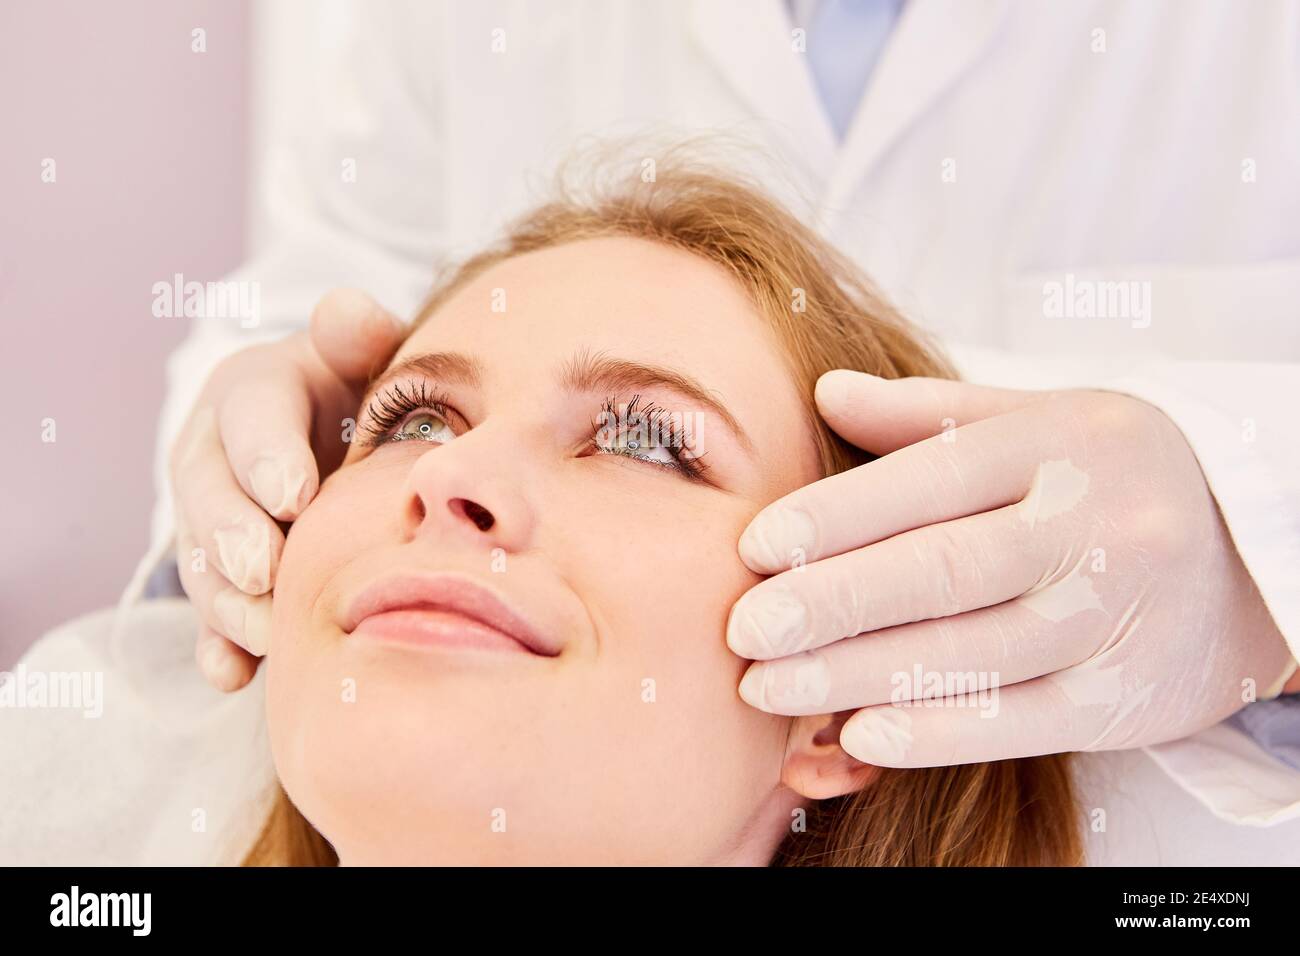 Beautician massages a woman's facial skin for better blood circulation and relaxation Stock Photo